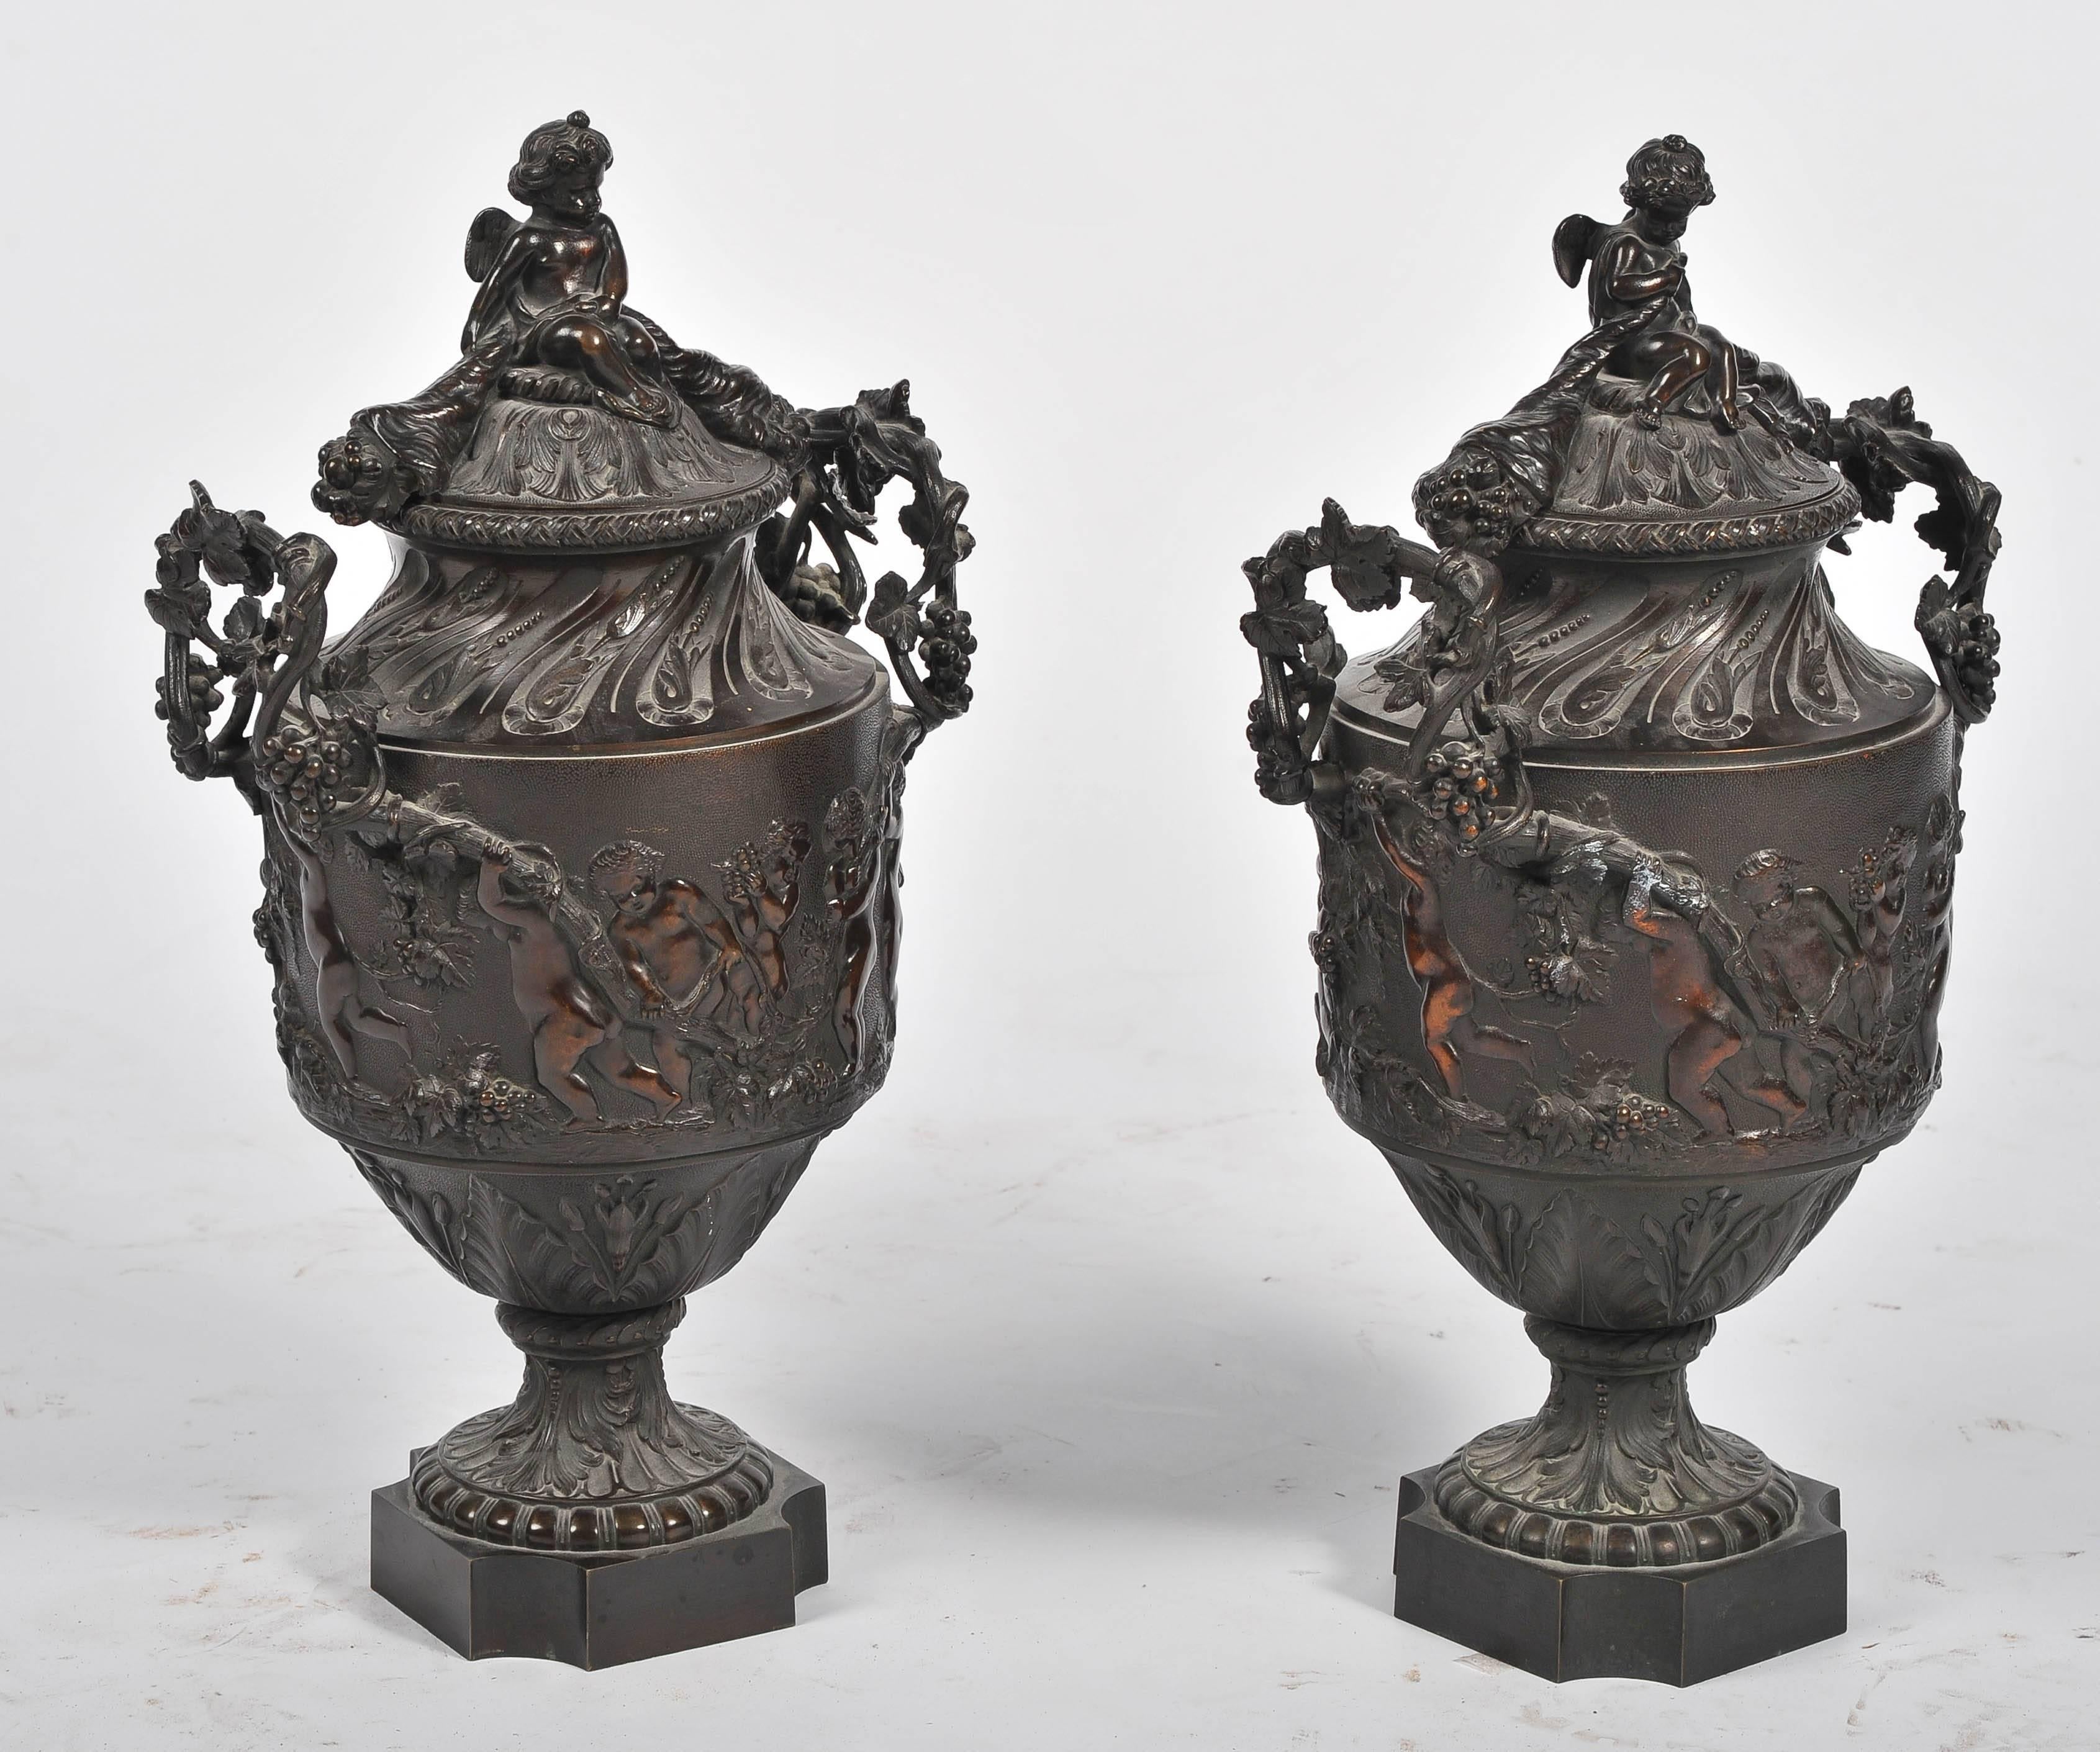 An impressive pair of 19th century Louis XVI style Bronze lidded urns, depicting Bacchanalian scenes of putti restraining a goat who is attempting to eat bunches of grapes from a vine.